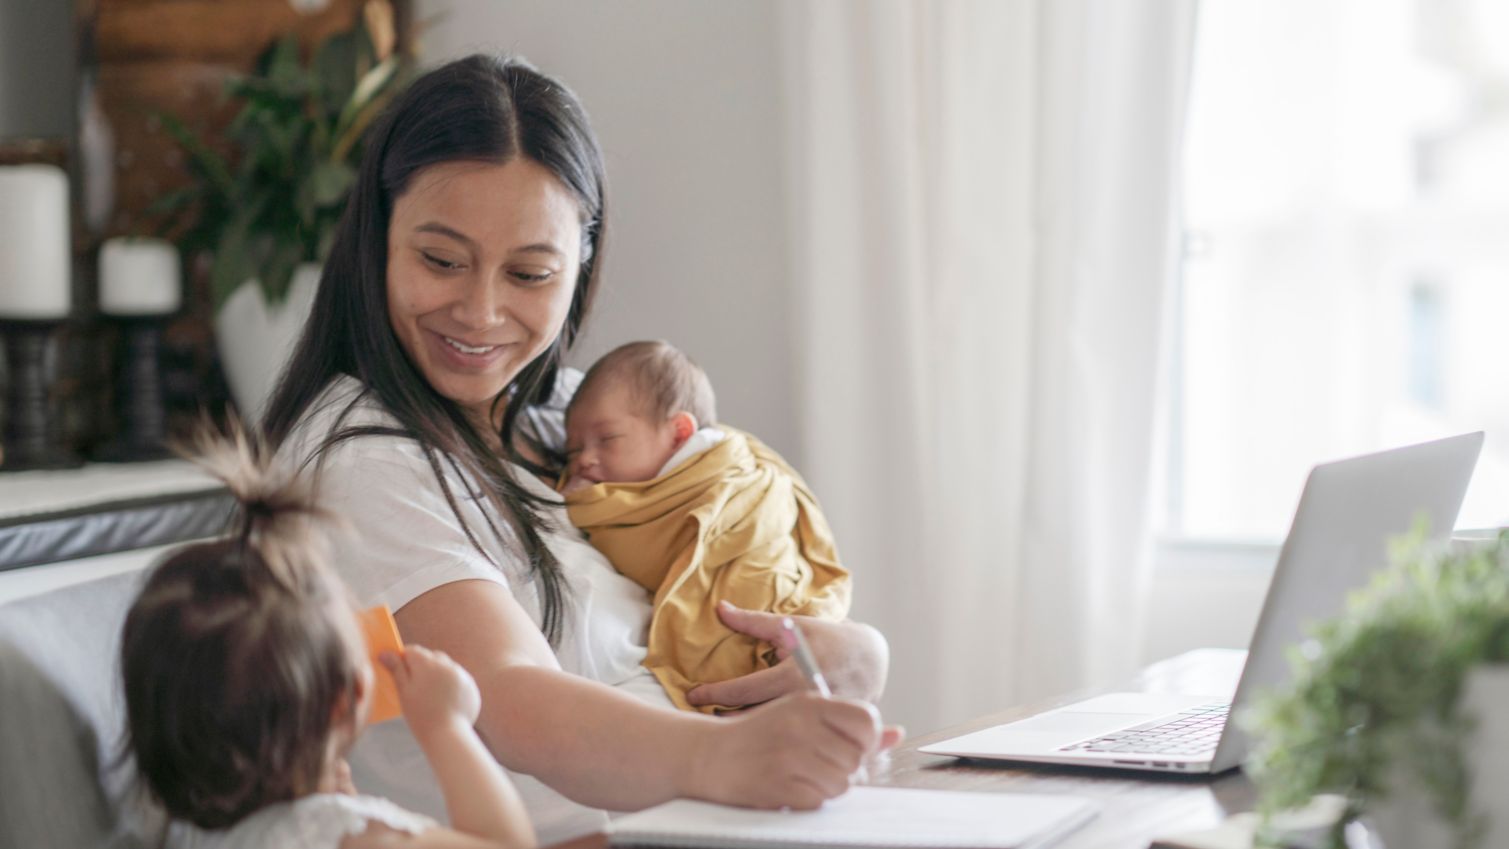 Mom holds infant next to toddler while filling out forms online